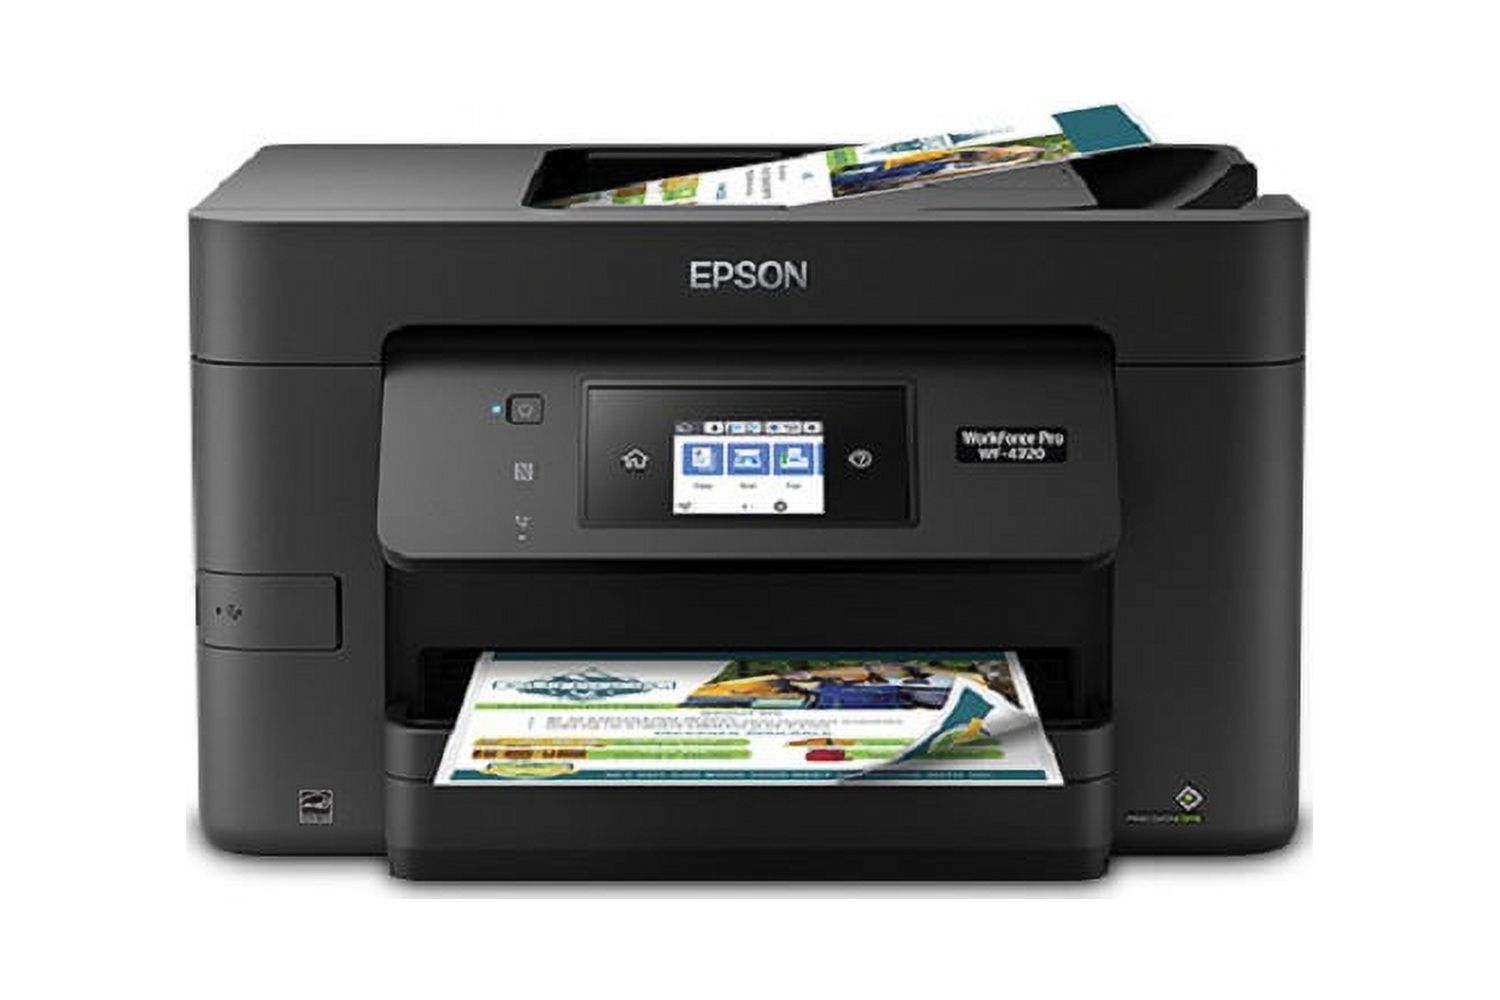 Epson - WorkForce Pro WF-4720 Wireless All-In-One Printer - image 1 of 5